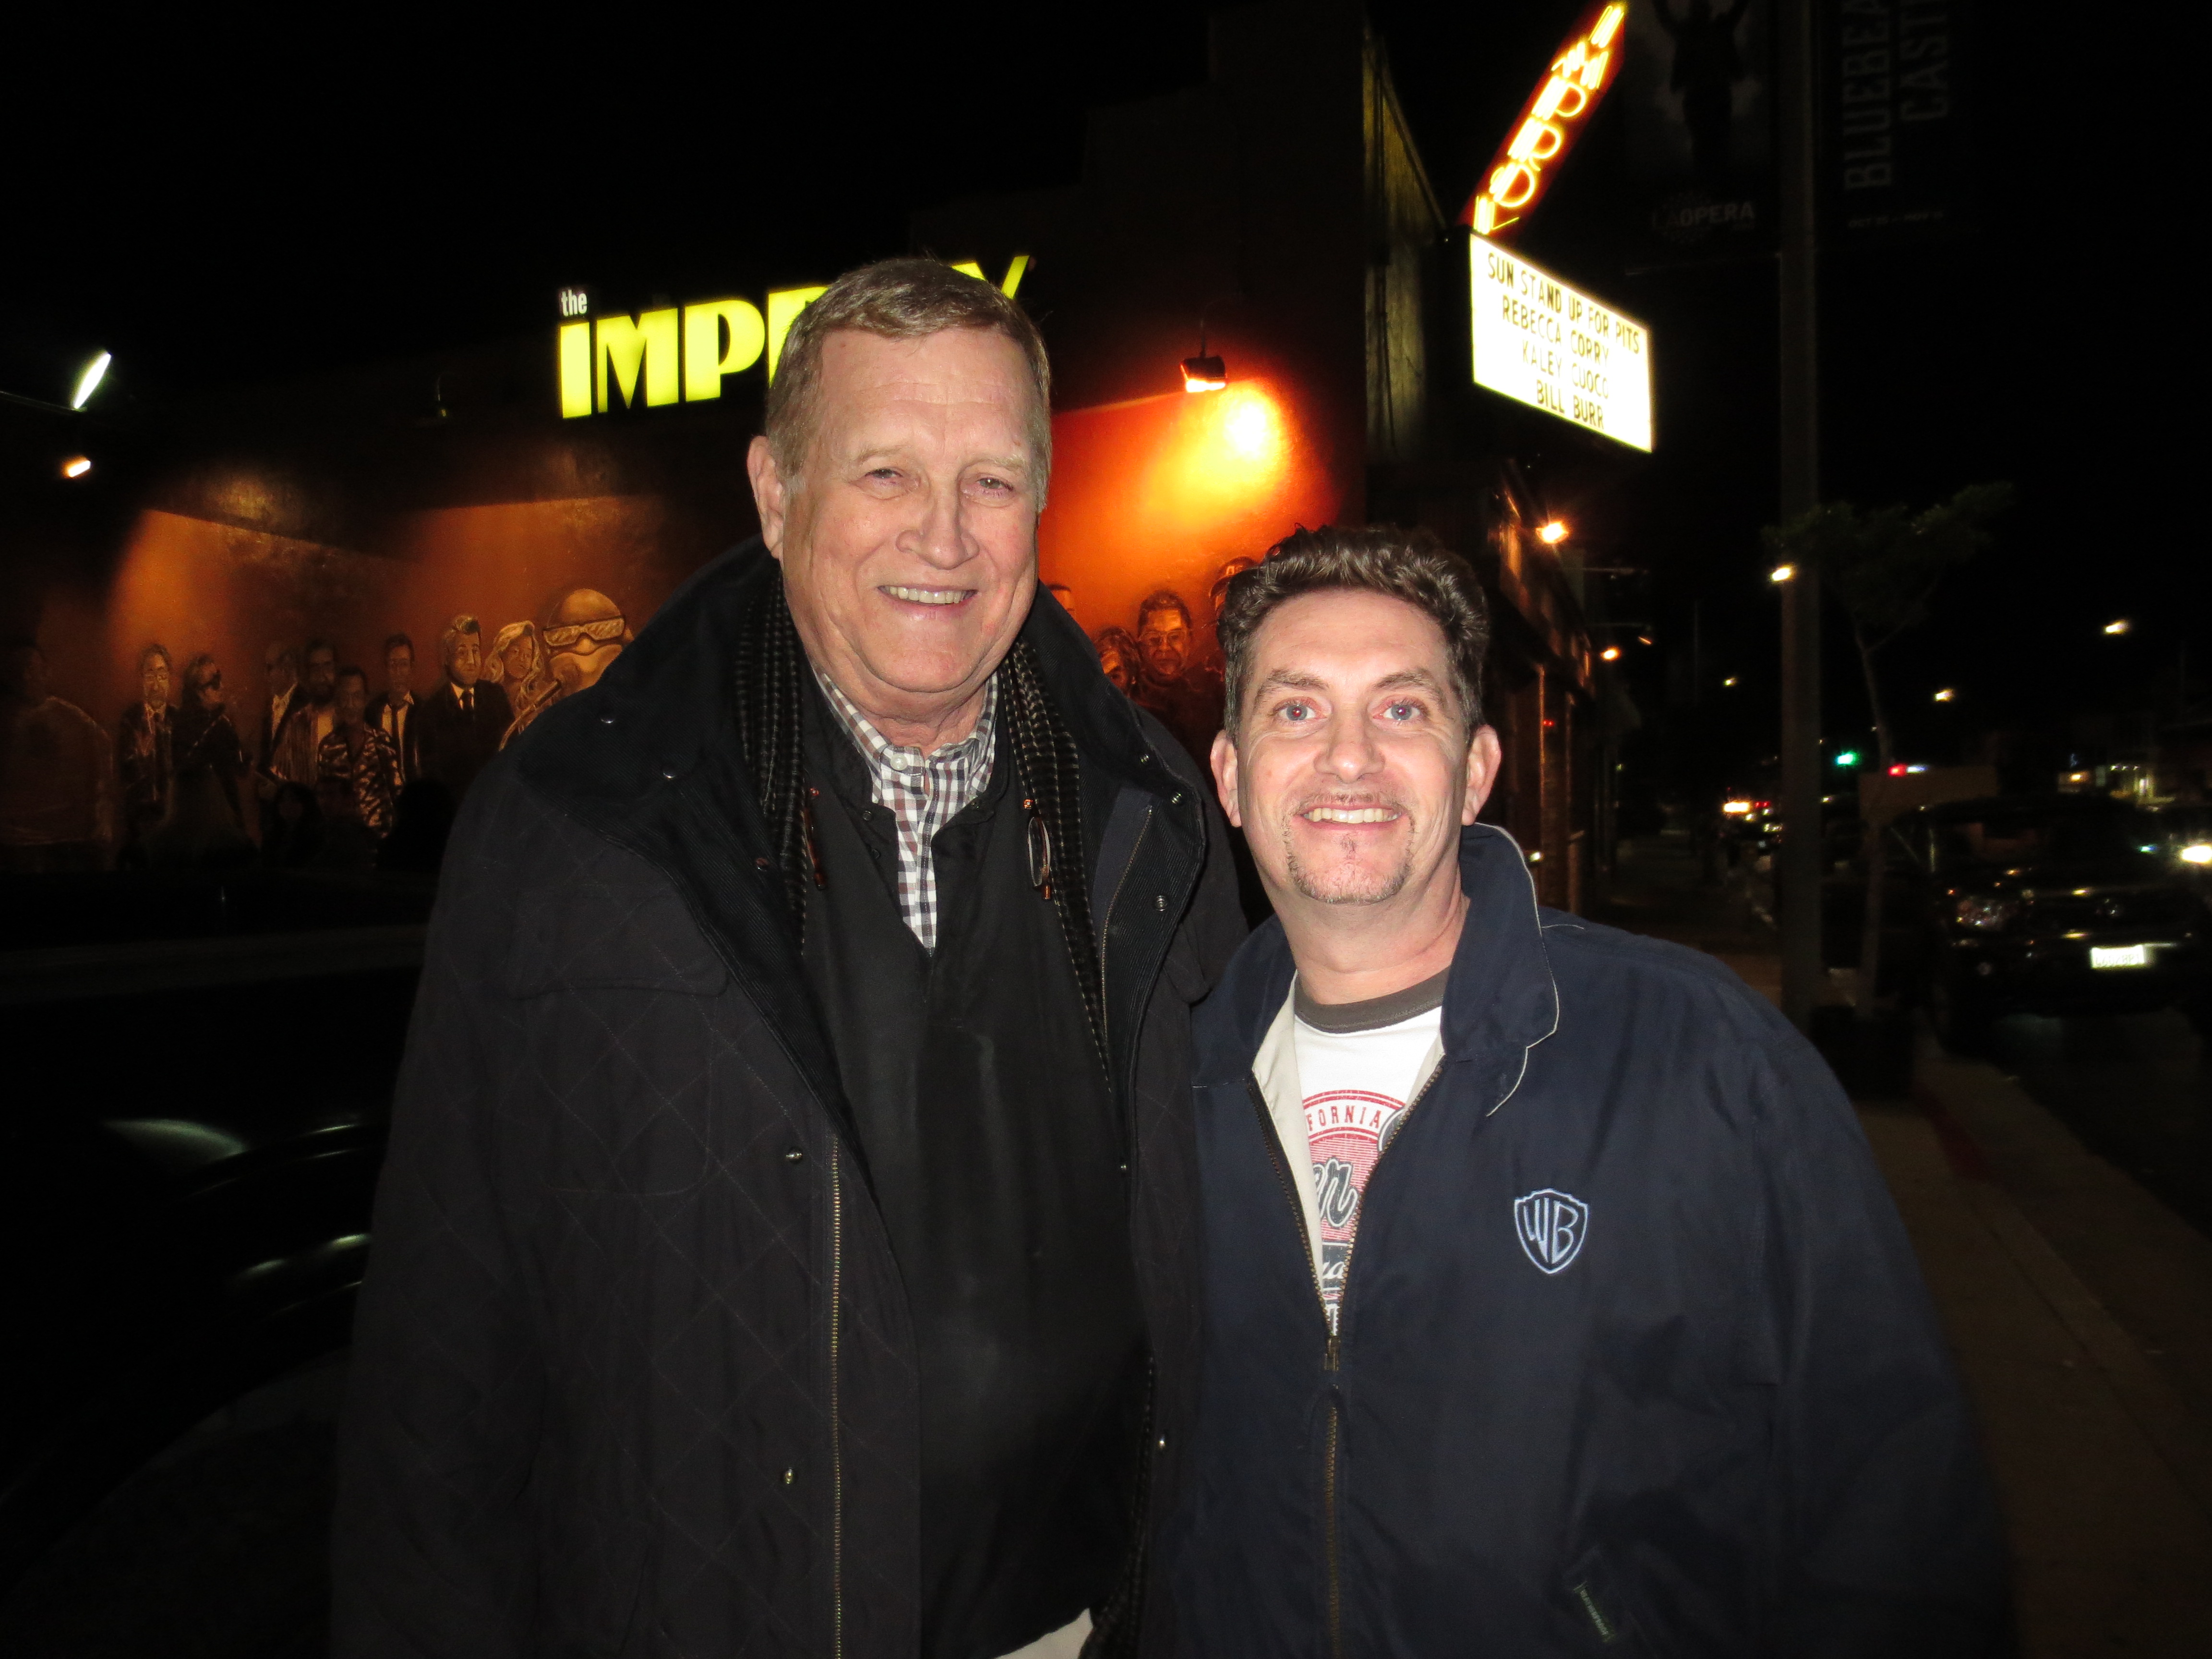 Ken Howard, star of the White Shadow and current Screen Actors Guild President with Michael Christaldi at a charity event at the Los Angeles Improv Comedy Club.